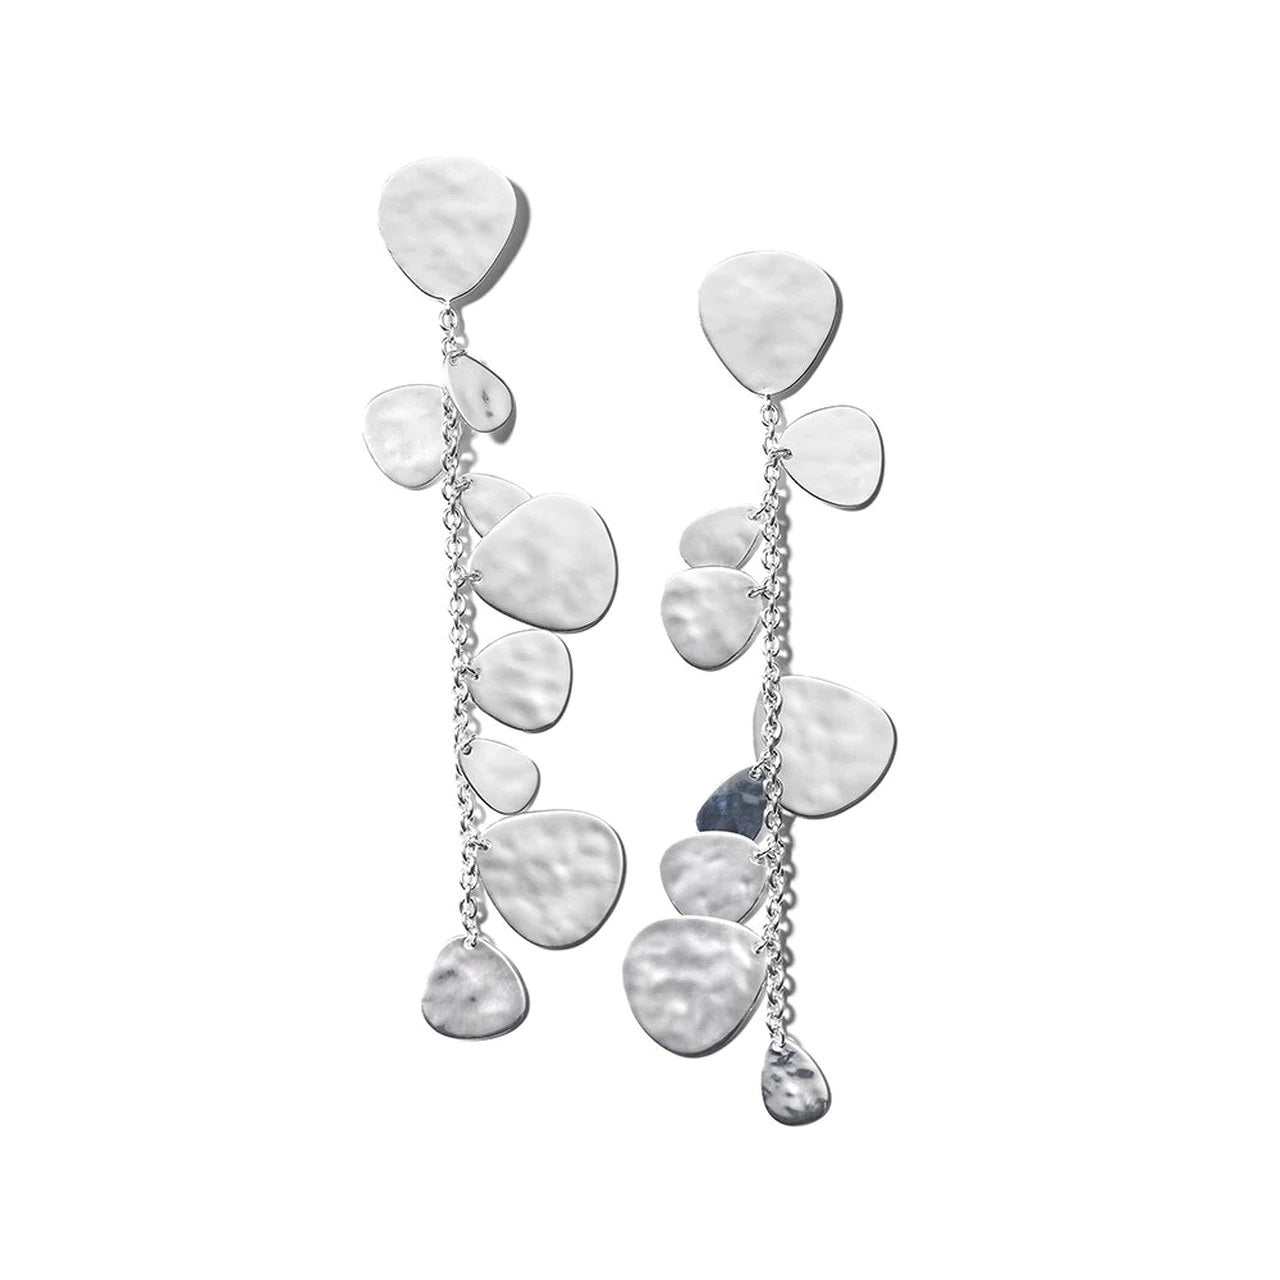 IPPOLITA Classico Sterling Silver Crinkle Nomad Linear Post Earrings